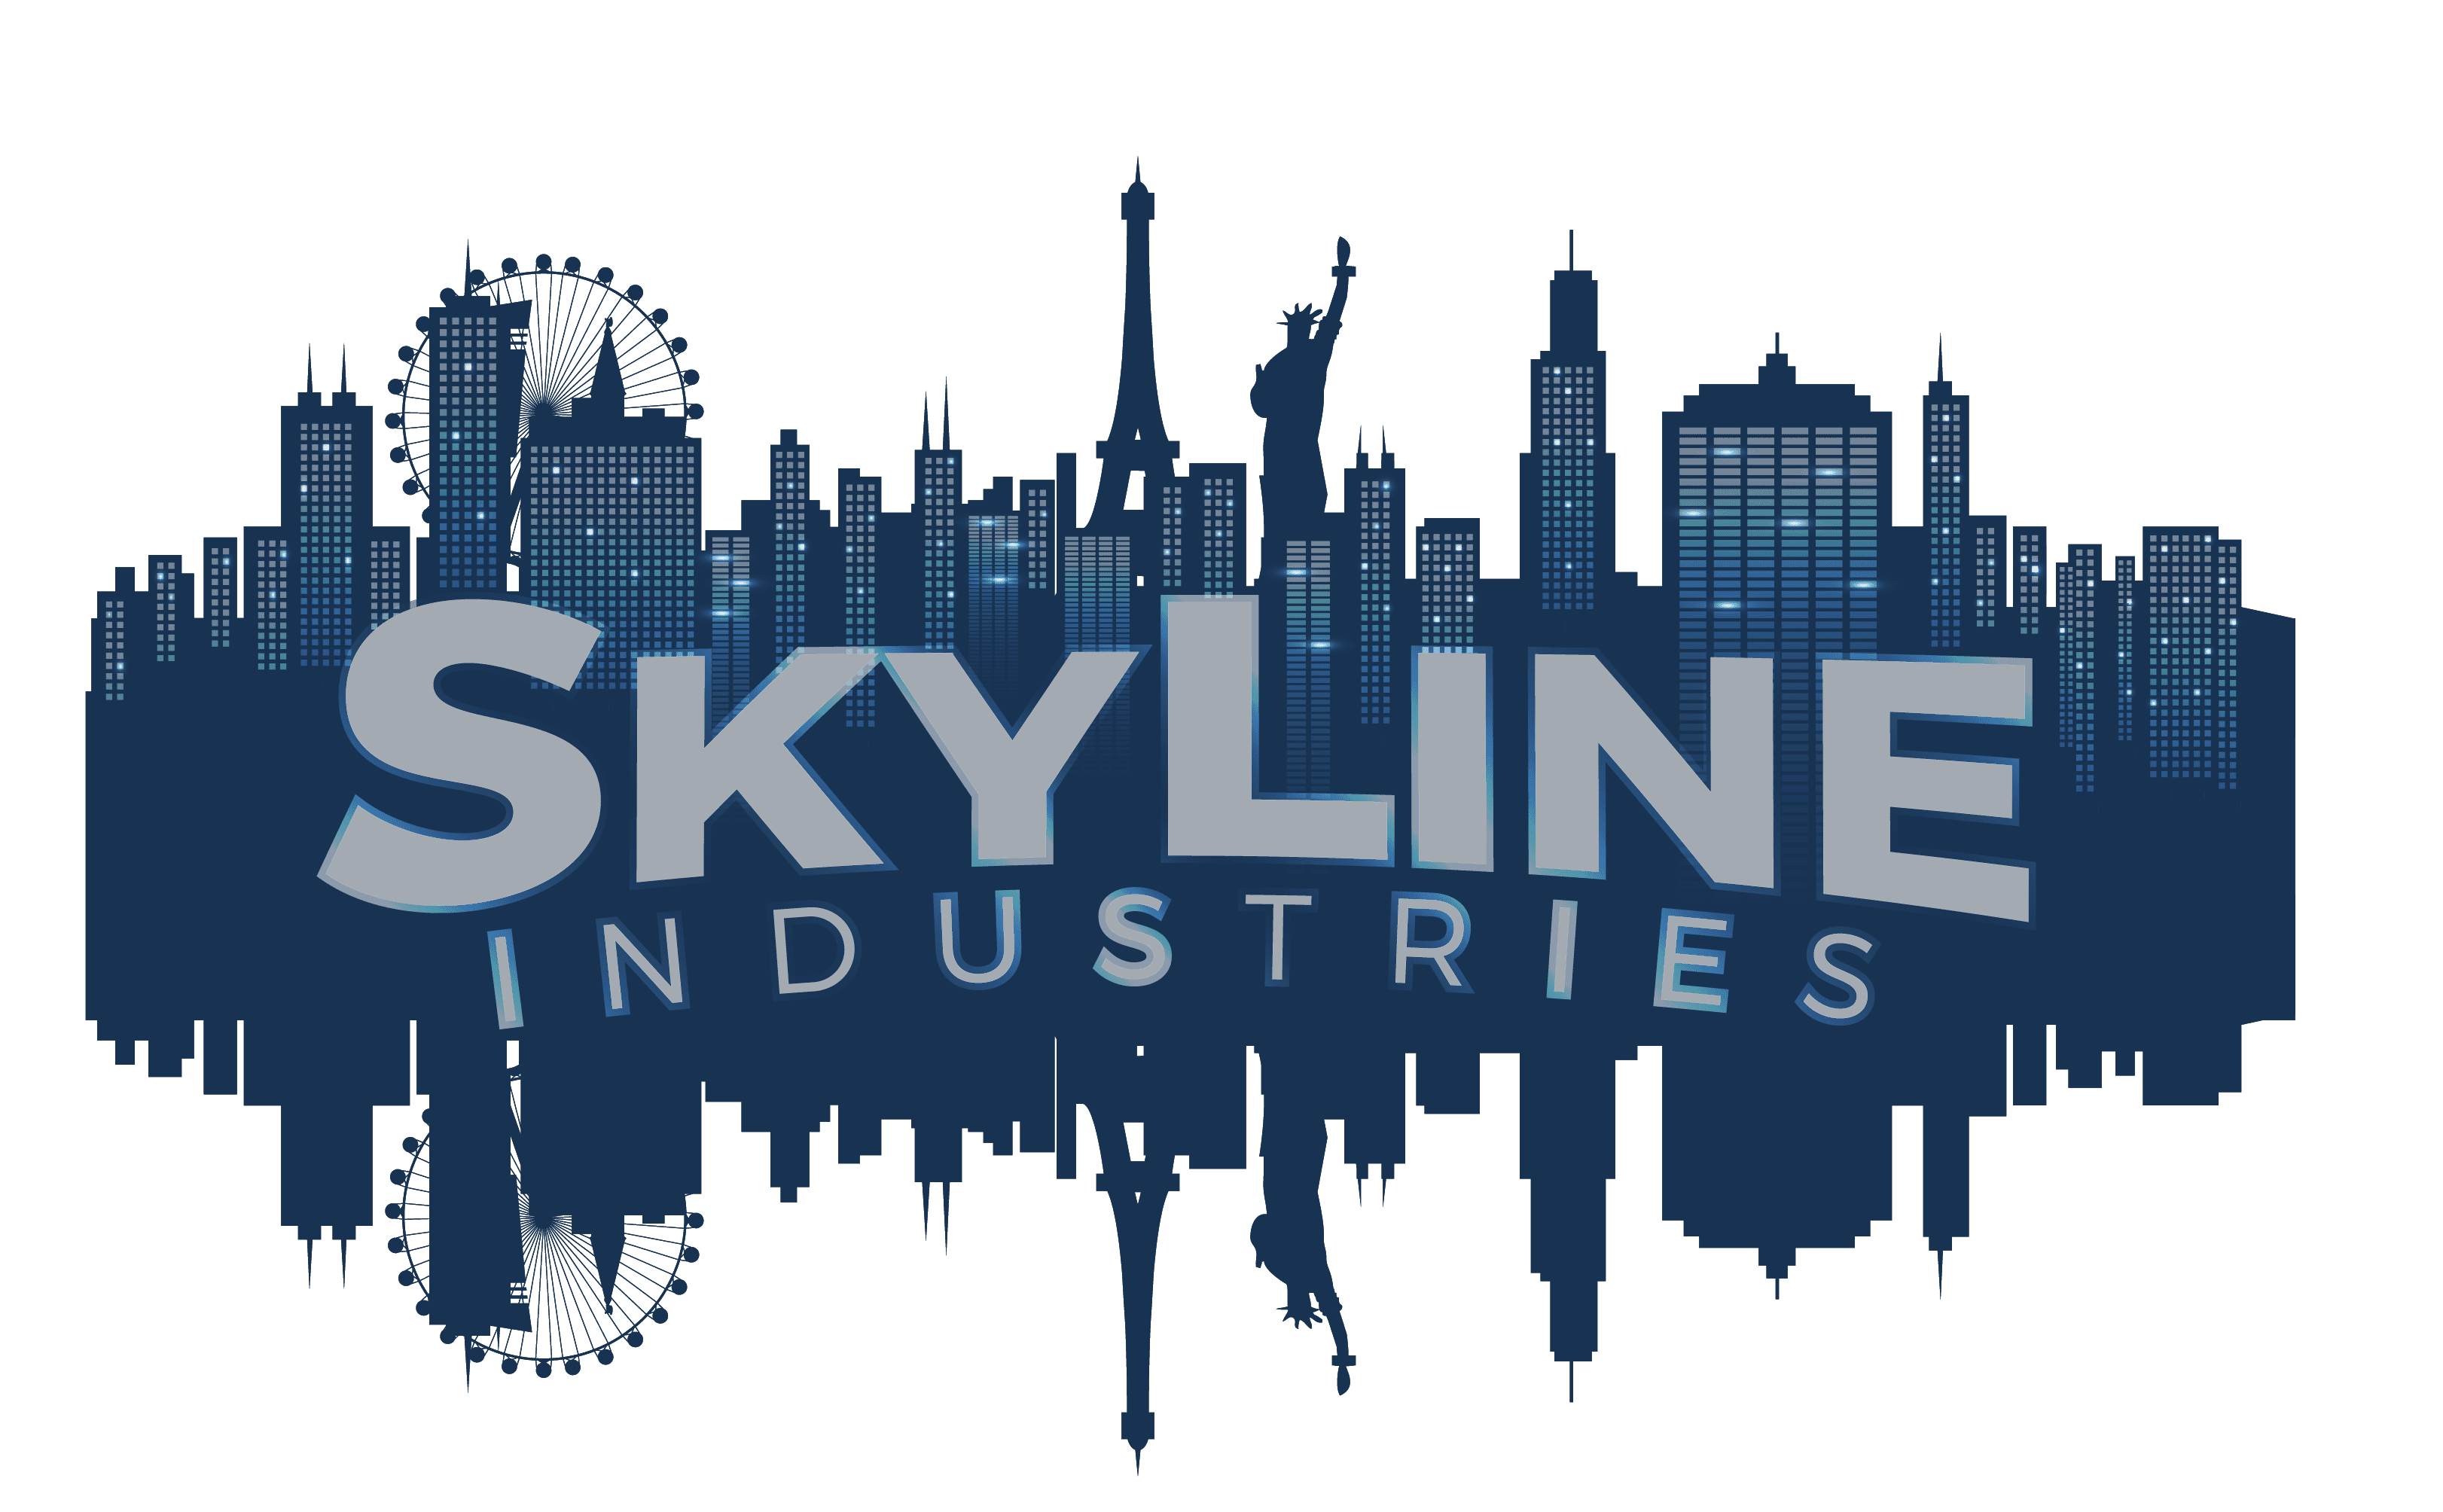 A skyline industries logo with the statue of liberty in the background.